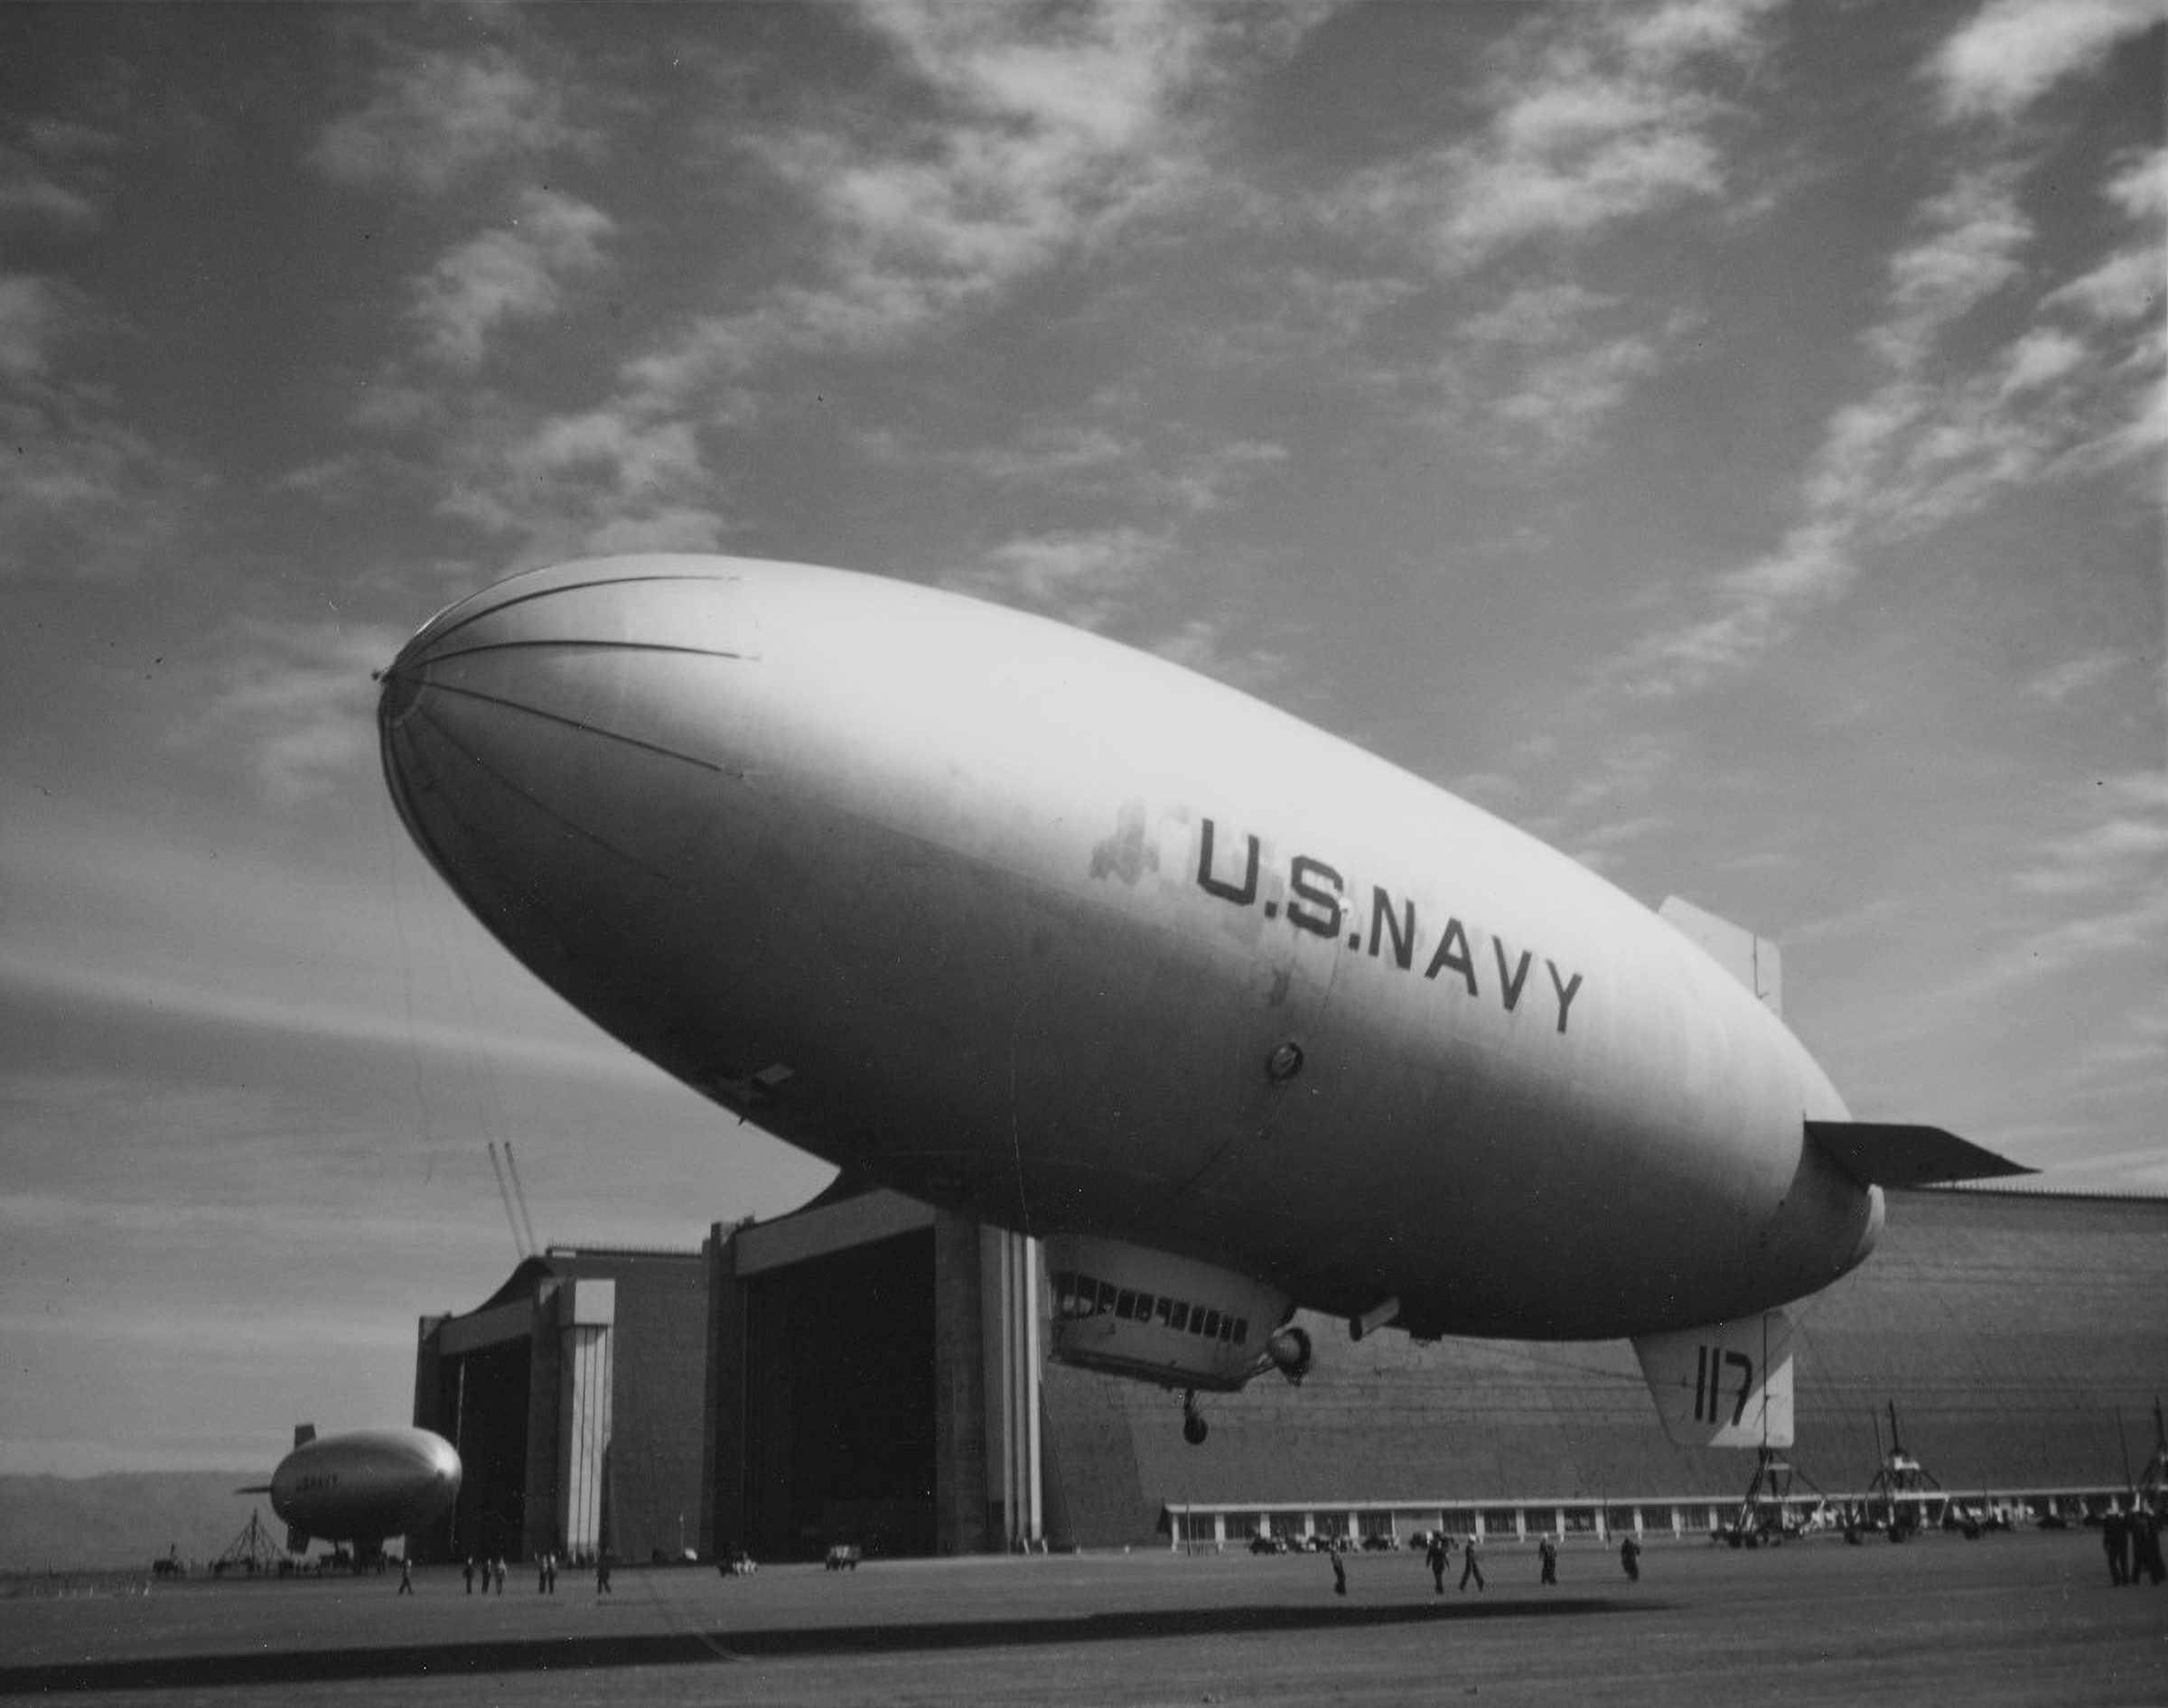 A blimp, with U.S. NAVY written on its side, lifts off near the open doors of Hangar 2. Ground crews prepare a blimp outside Hangar 3 for its next flight.